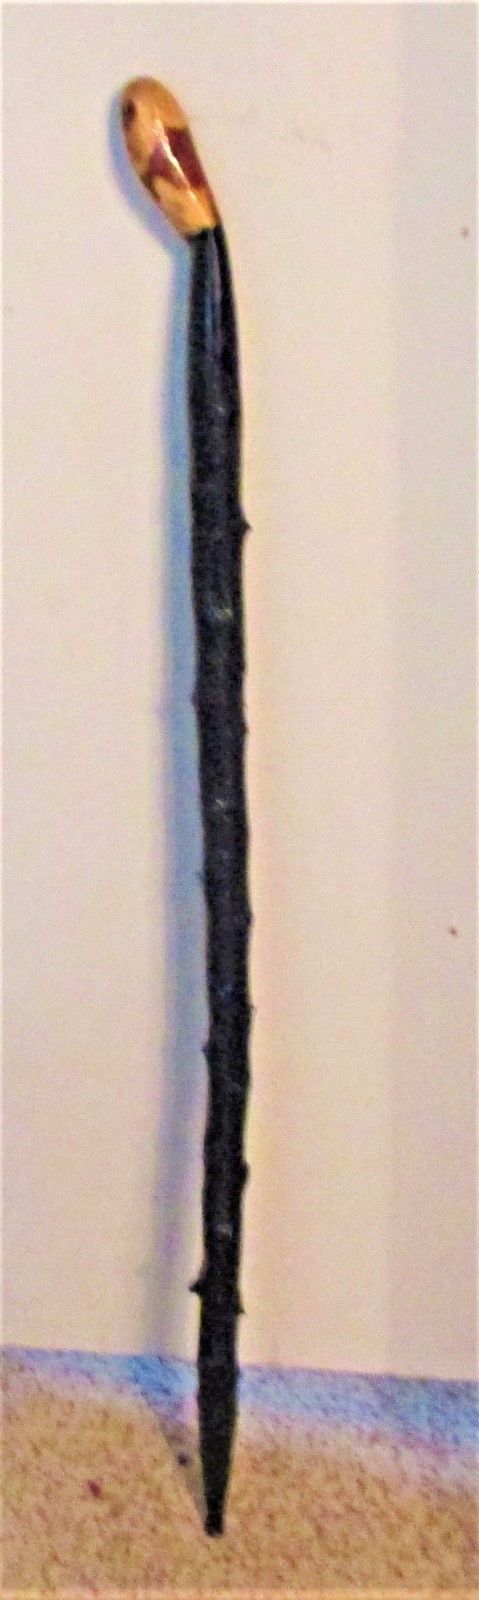 HARVESTED FROM THE BLACKTHORN HEDGE THE SHILLELAGH BLACKTHORN WALKING STICK